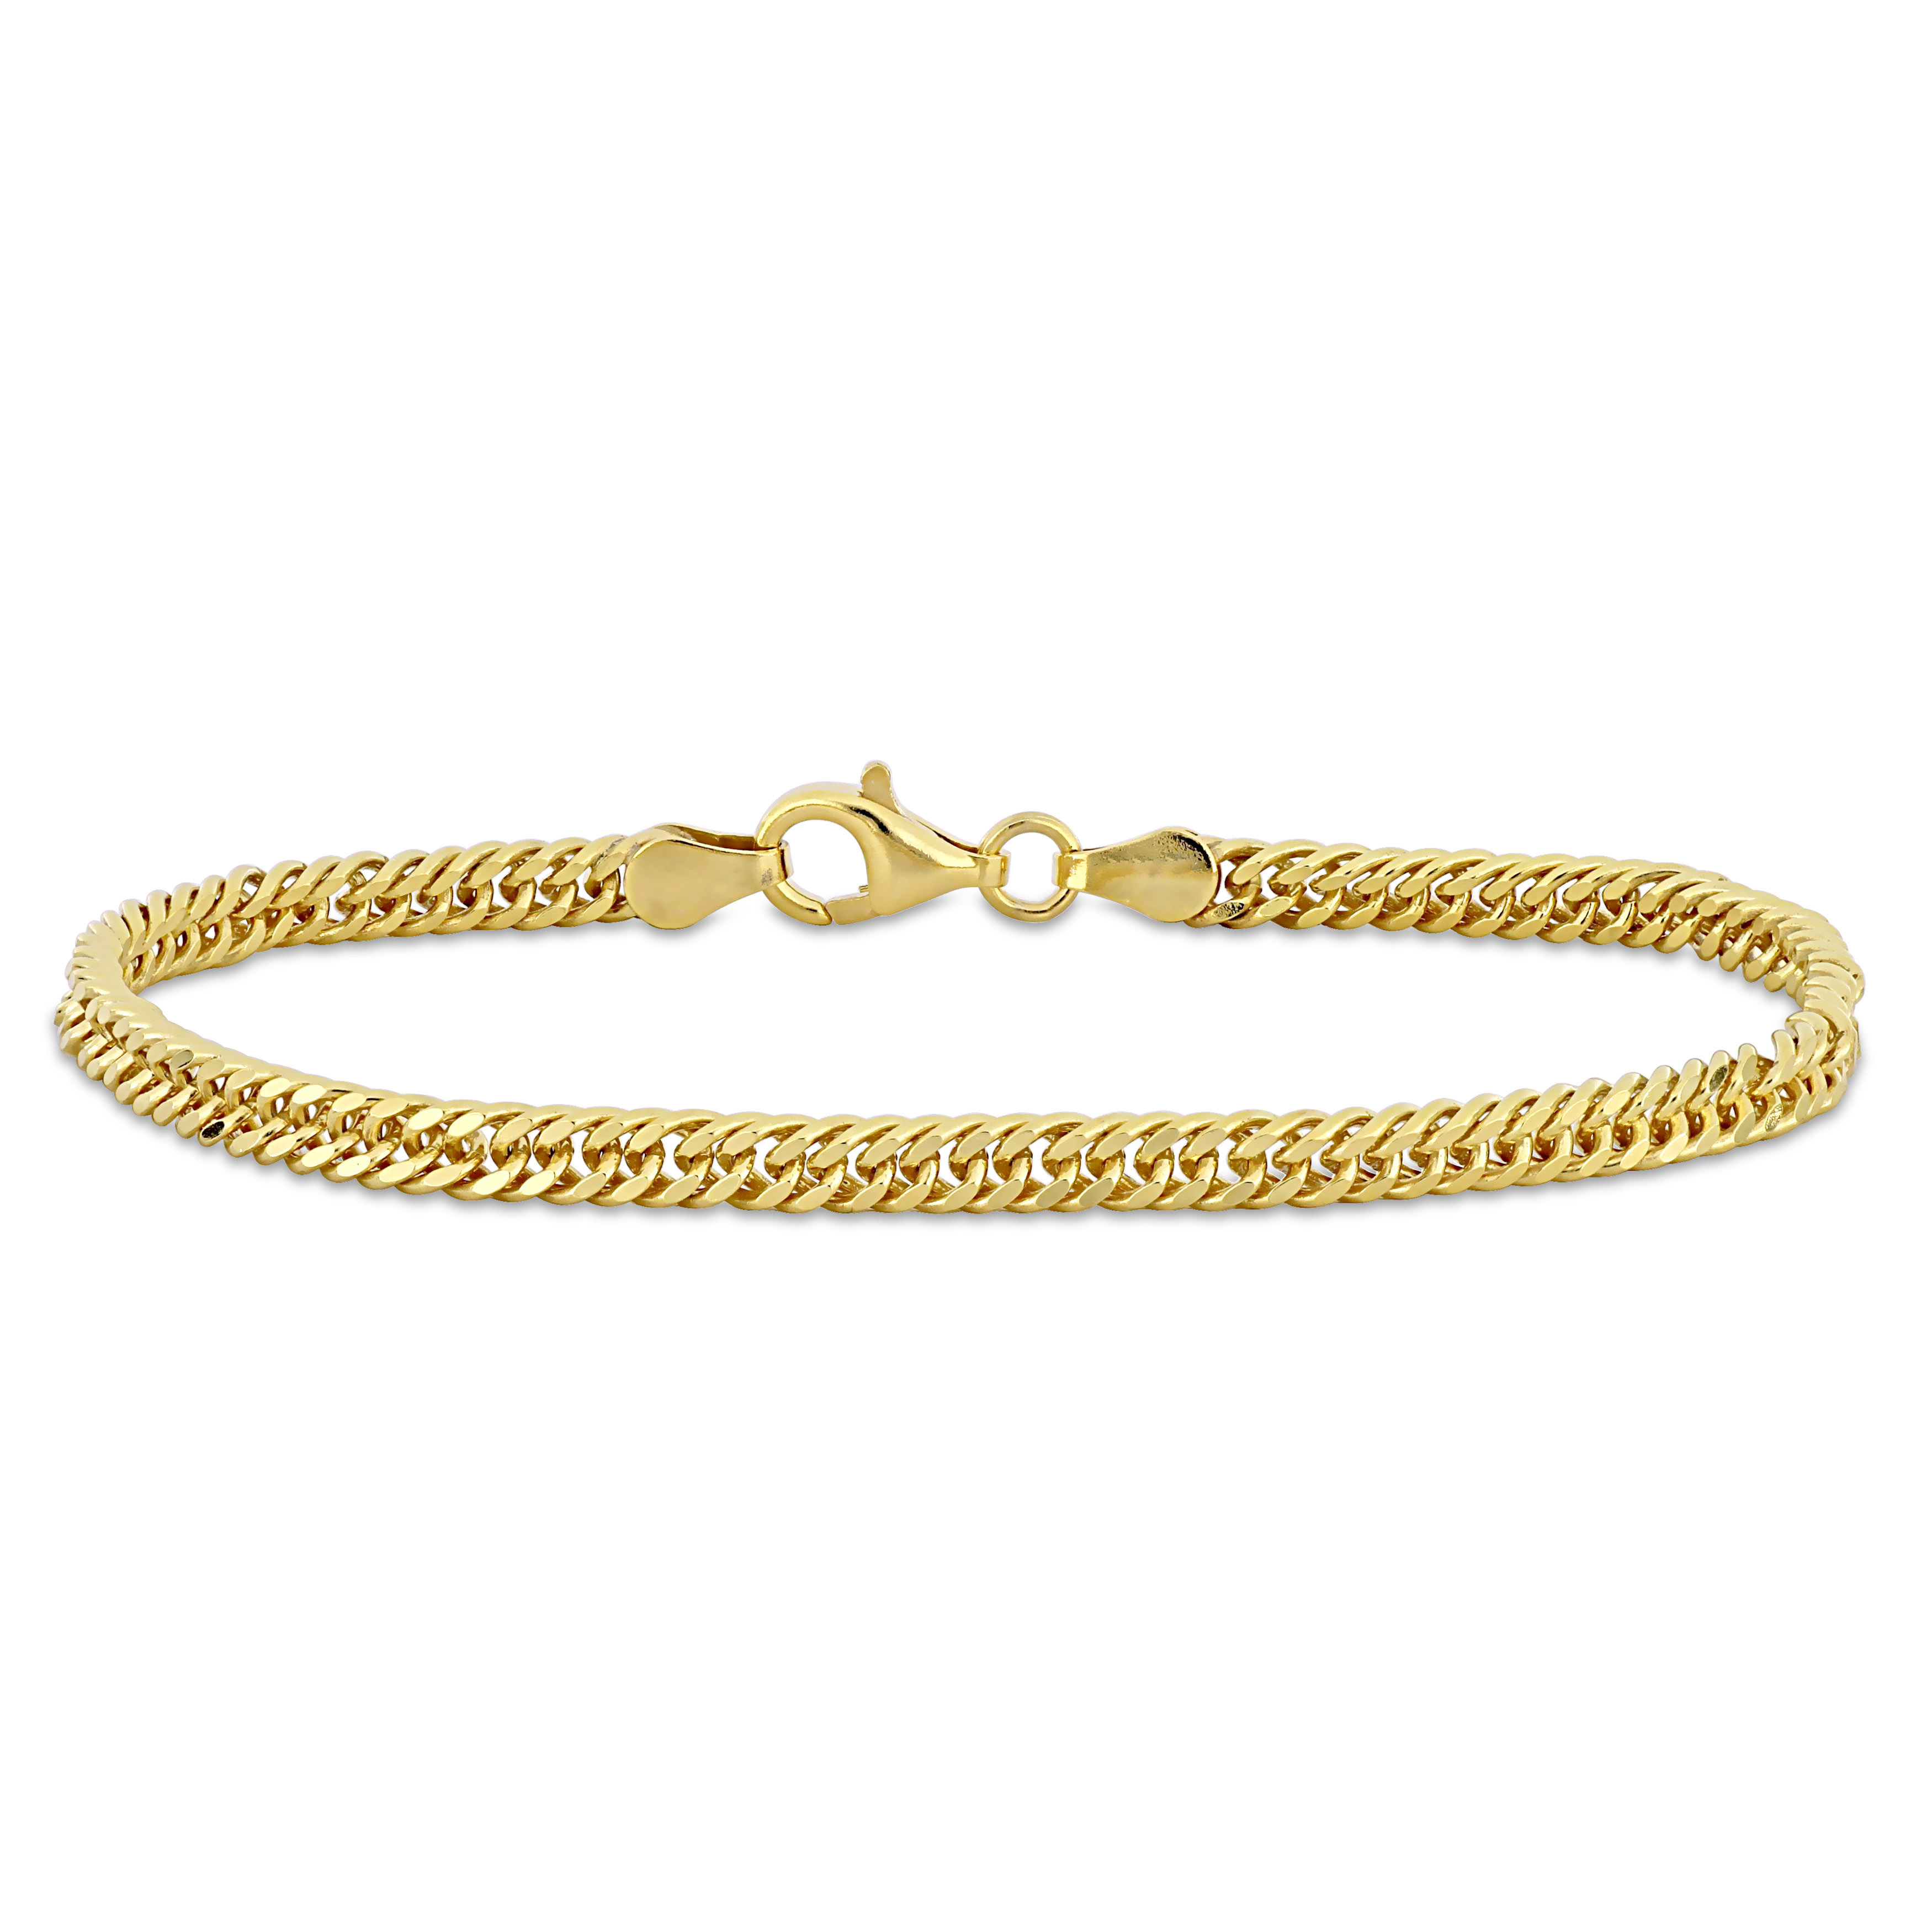 4mm Double Curb Link Chain Bracelet in Yellow Plated Sterling Silver - 7.5 in.